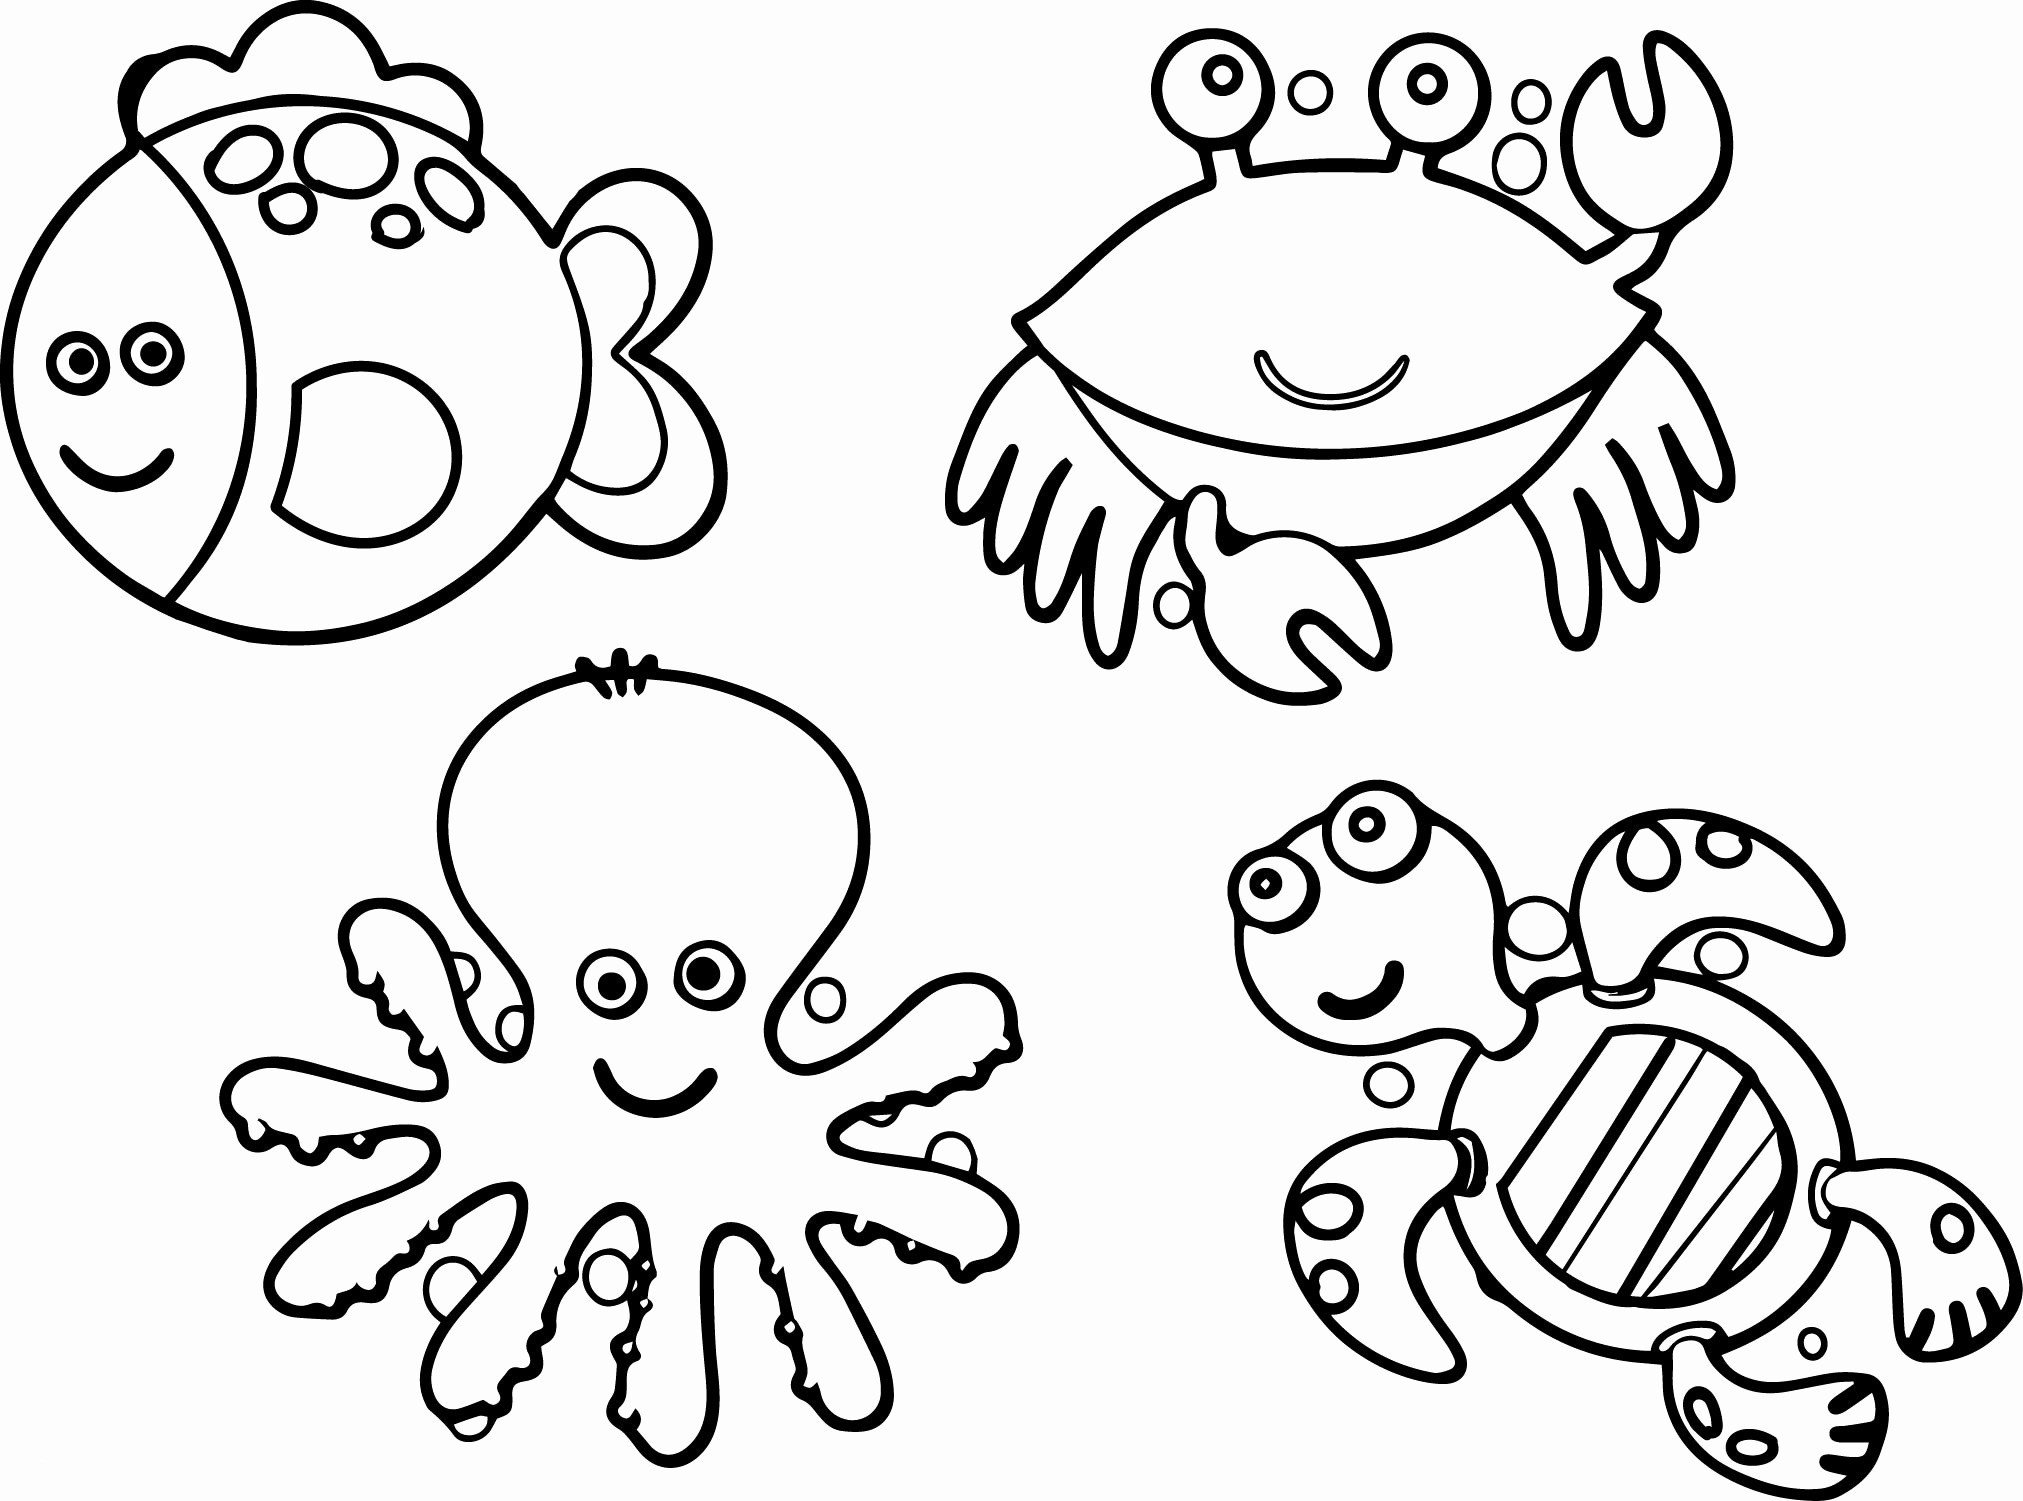 ocean-animals-coloring-pages-of-ocean-animals-coloring-pages Ocean Animals Coloring Pages Animal 